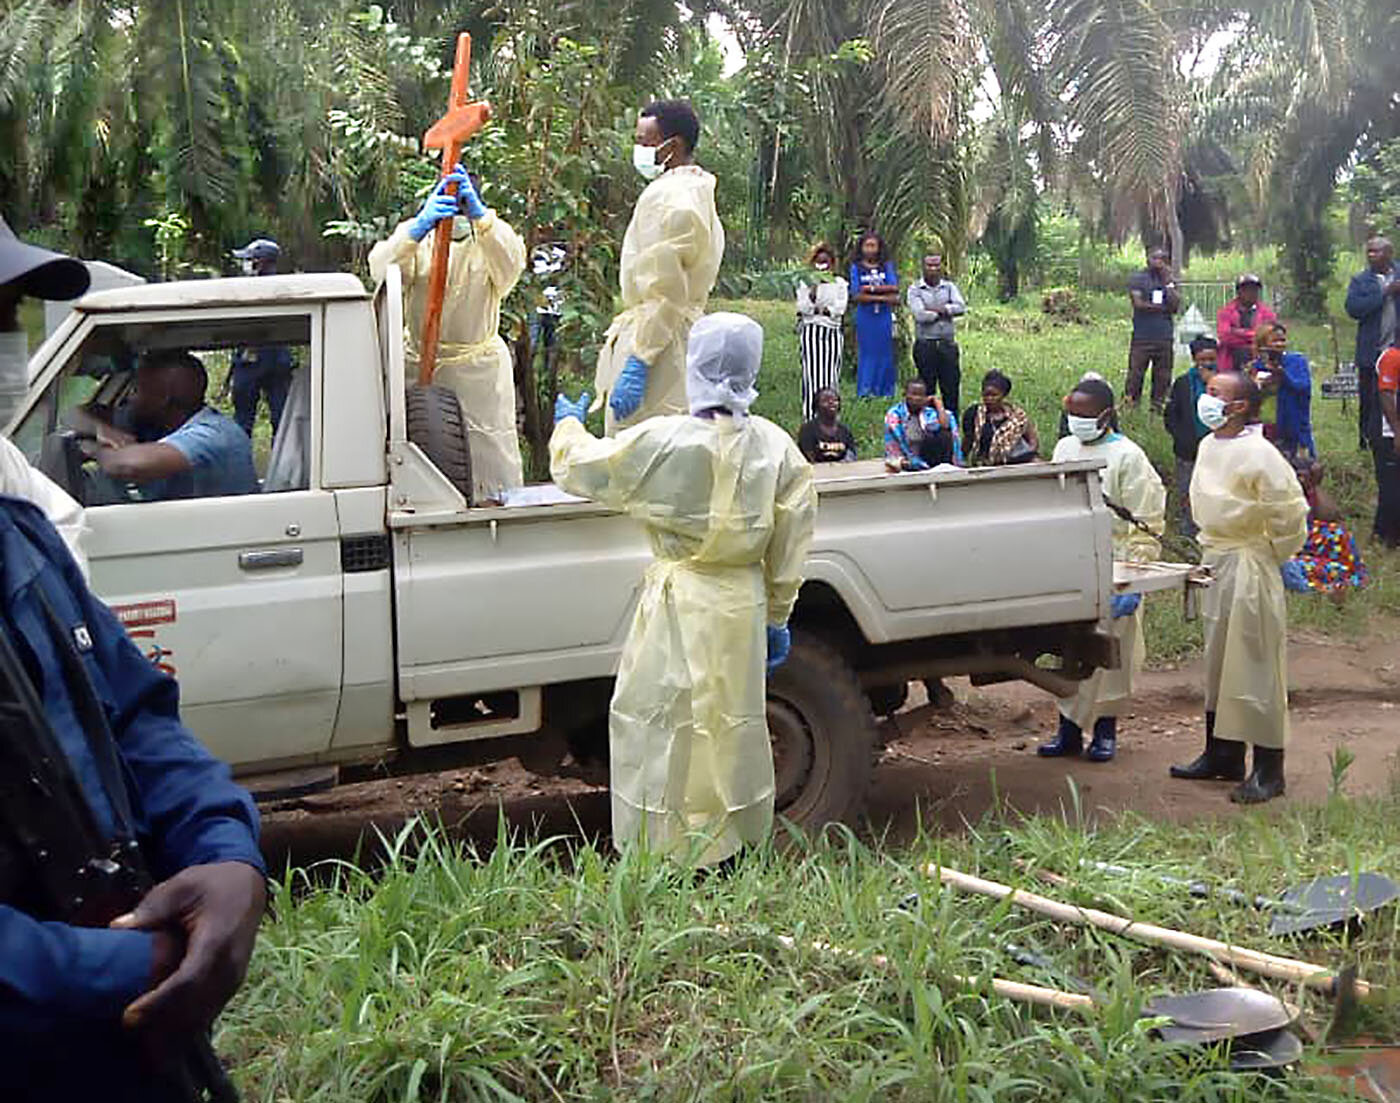 An Ebola funeral in the Democratic Republic of the Congo